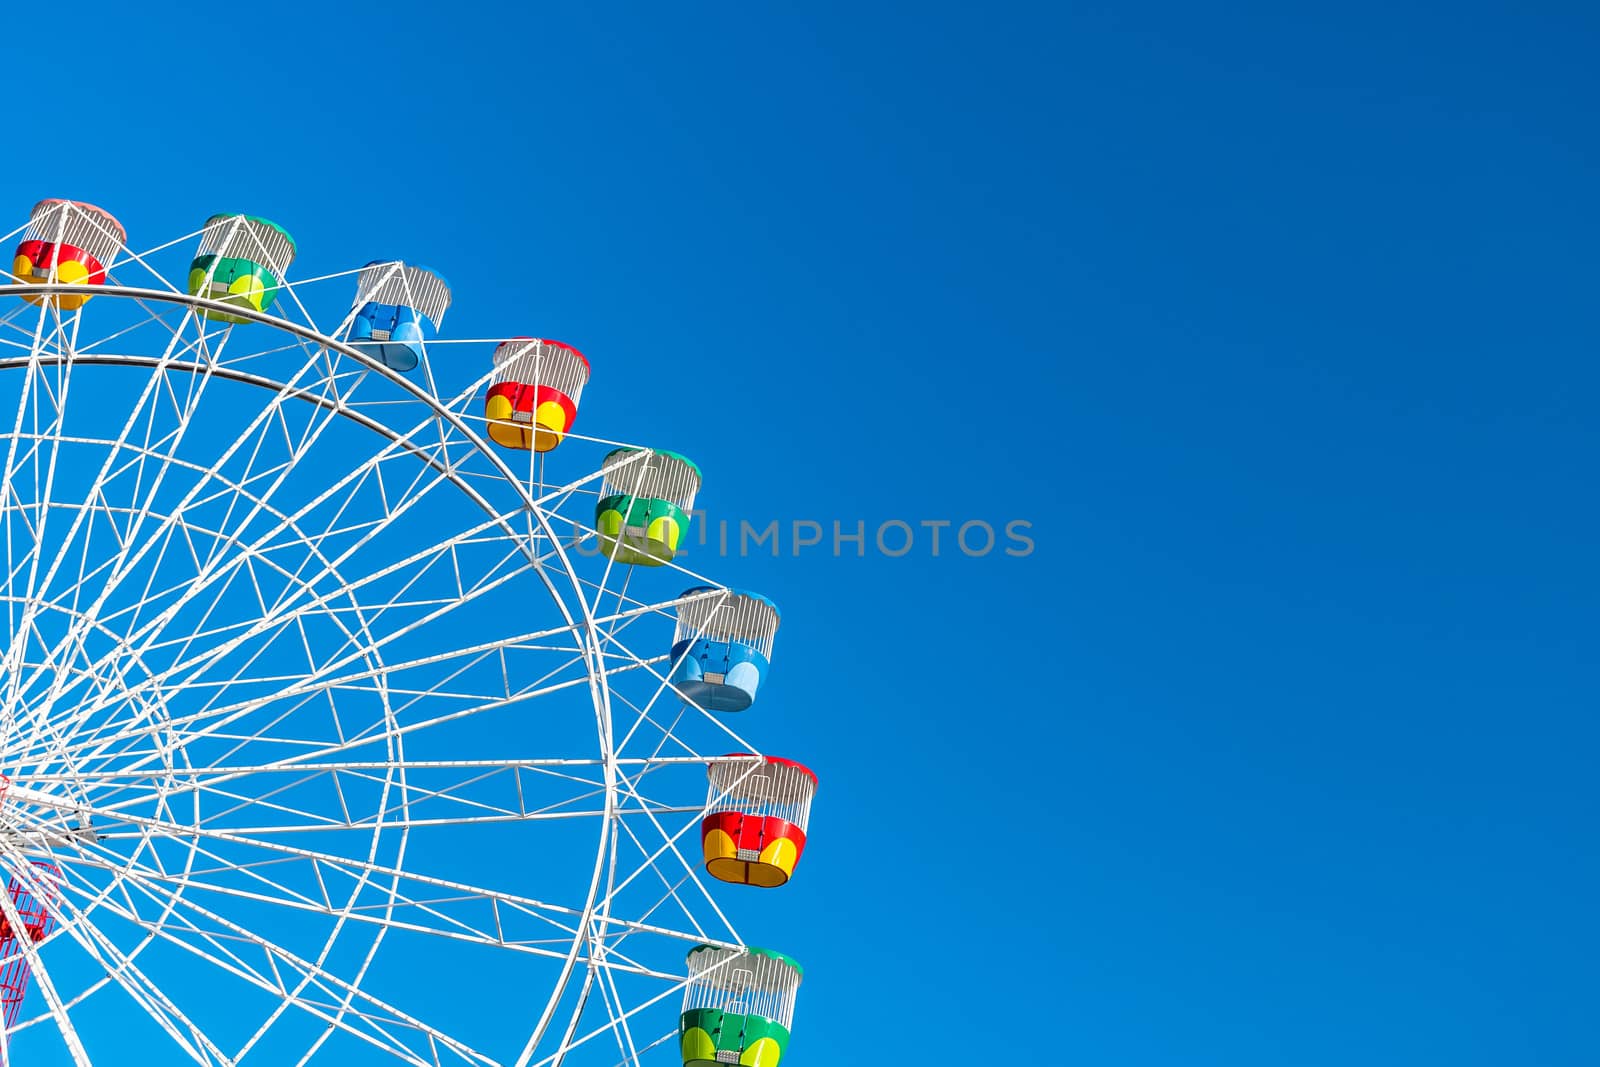 Ferris wheel with colourful rainbow seats in Sydney on clear blue sky background